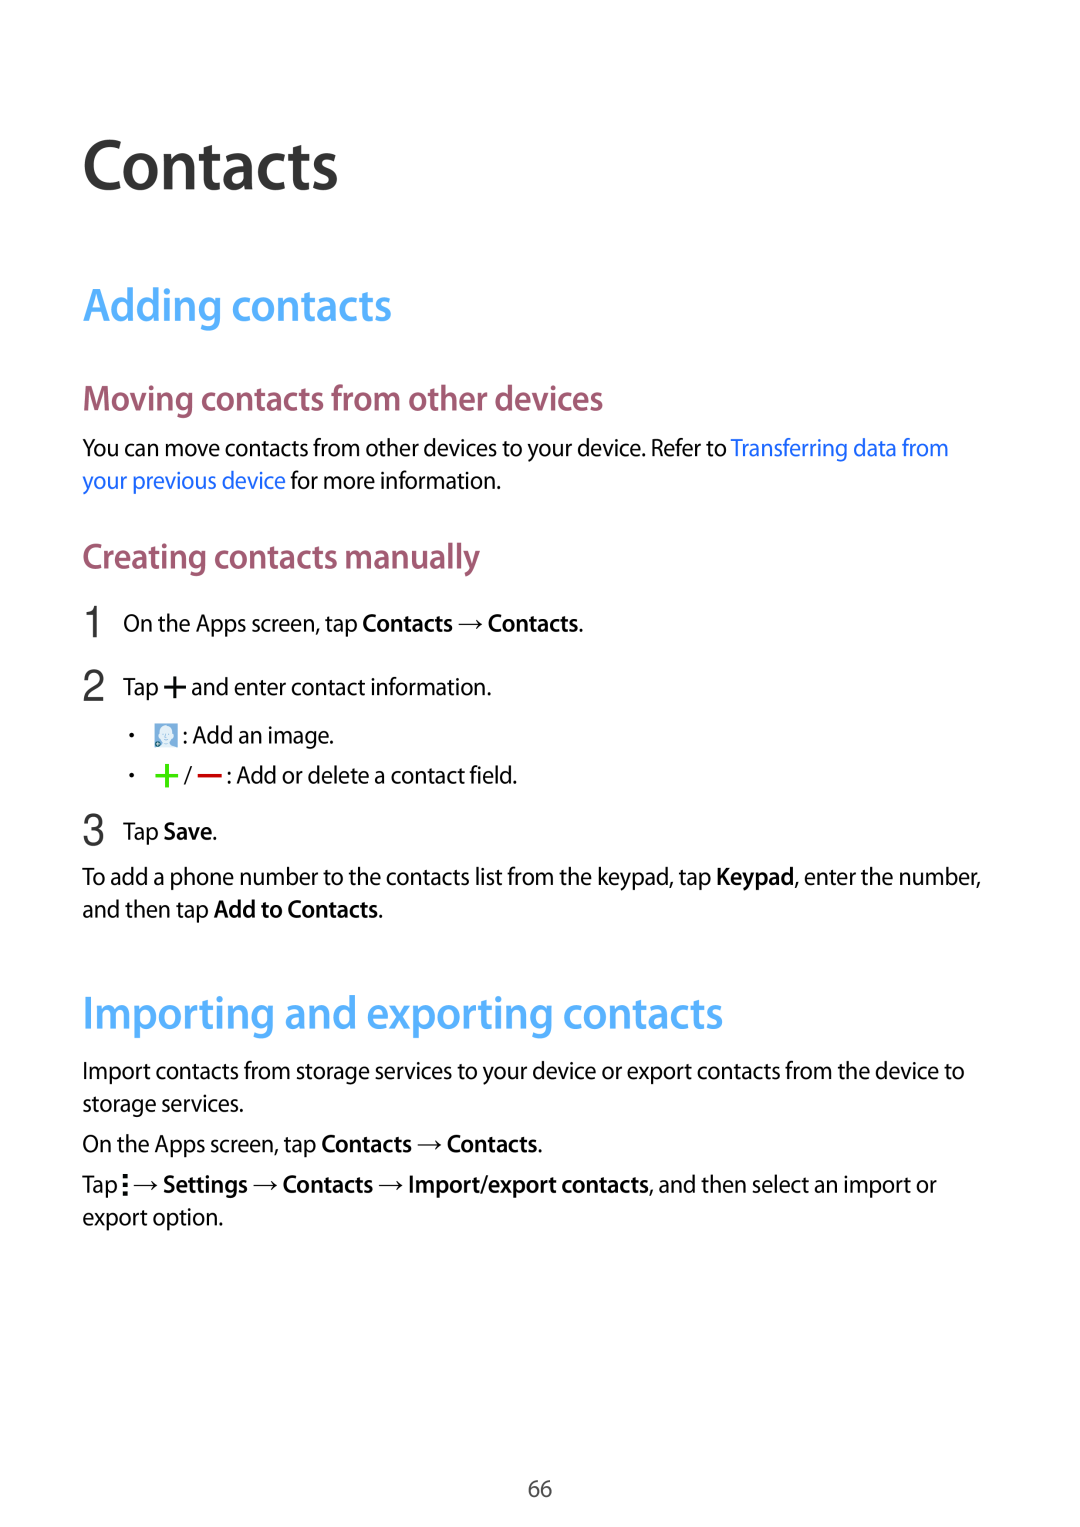 Samsung SM-A700HZKDXXV Contacts, Adding contacts, Importing and exporting contacts, Moving contacts from other devices 